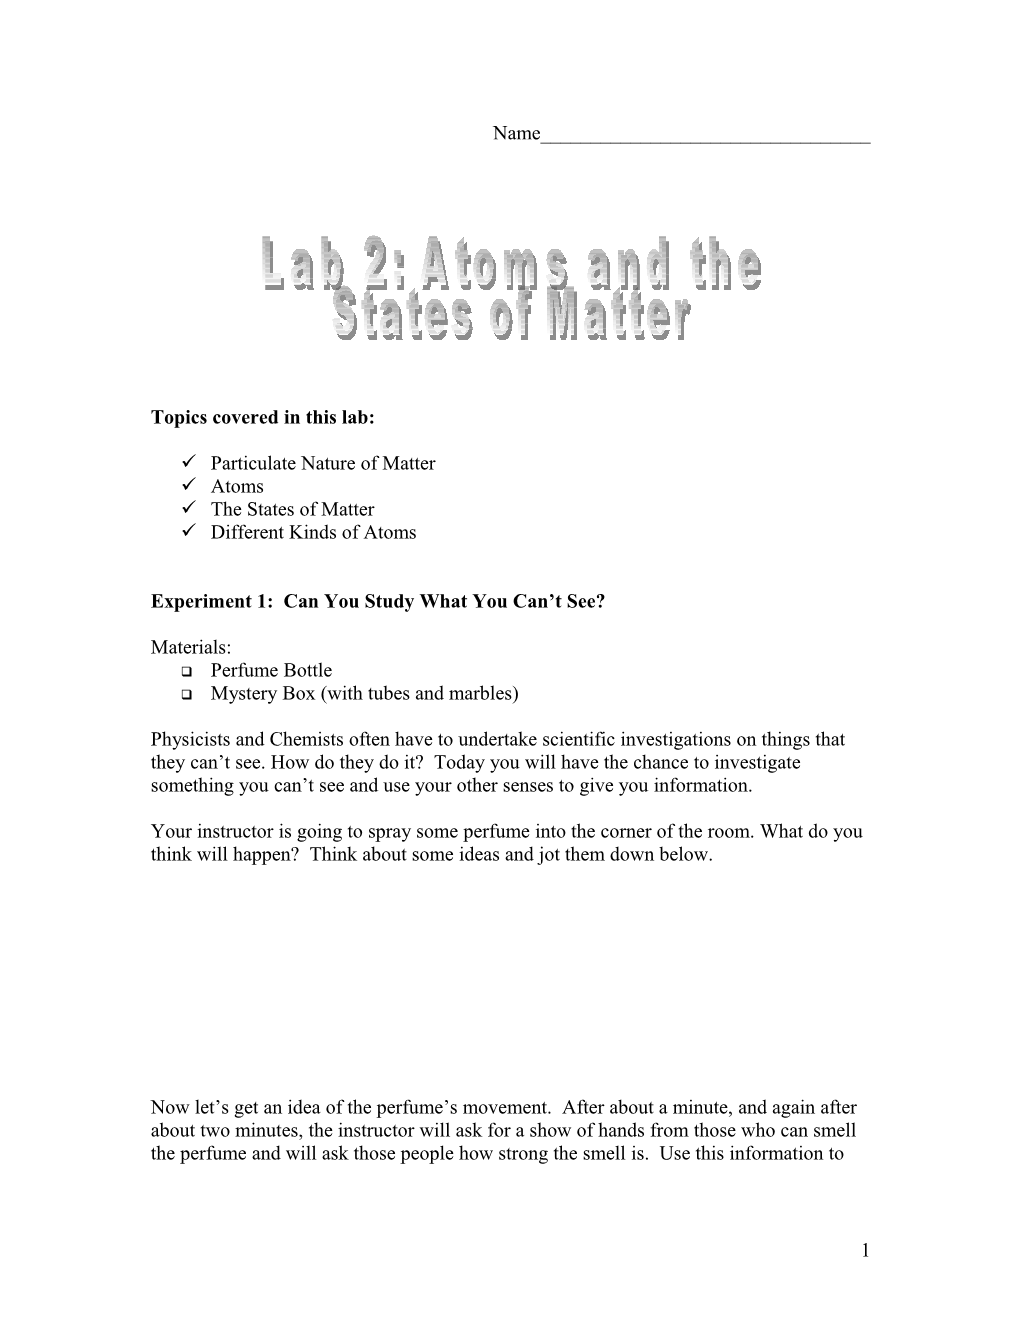 Atoms and the States of Matter Lab 2